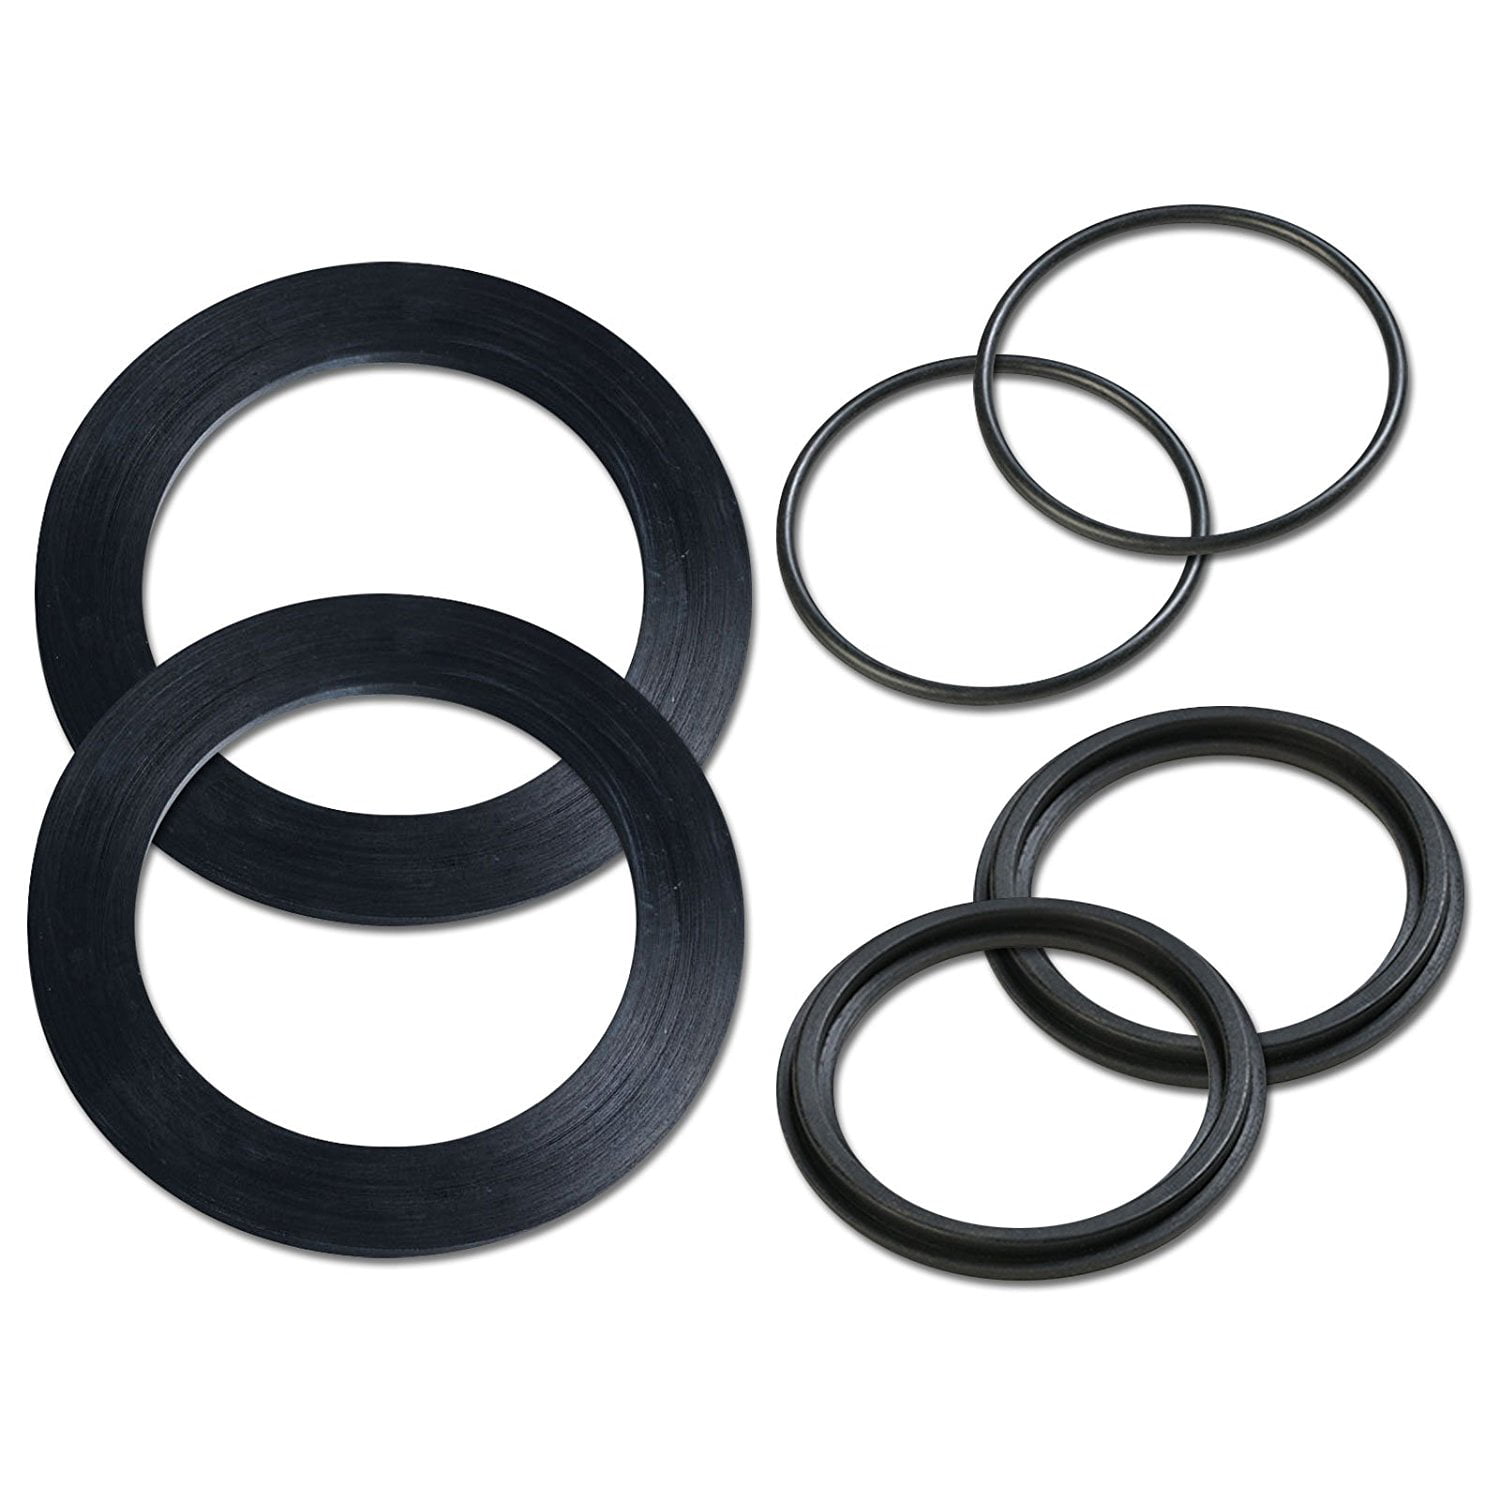 TWO Intex Replacement Flat Wall Fitter Rubber Gasket Washer 10255 